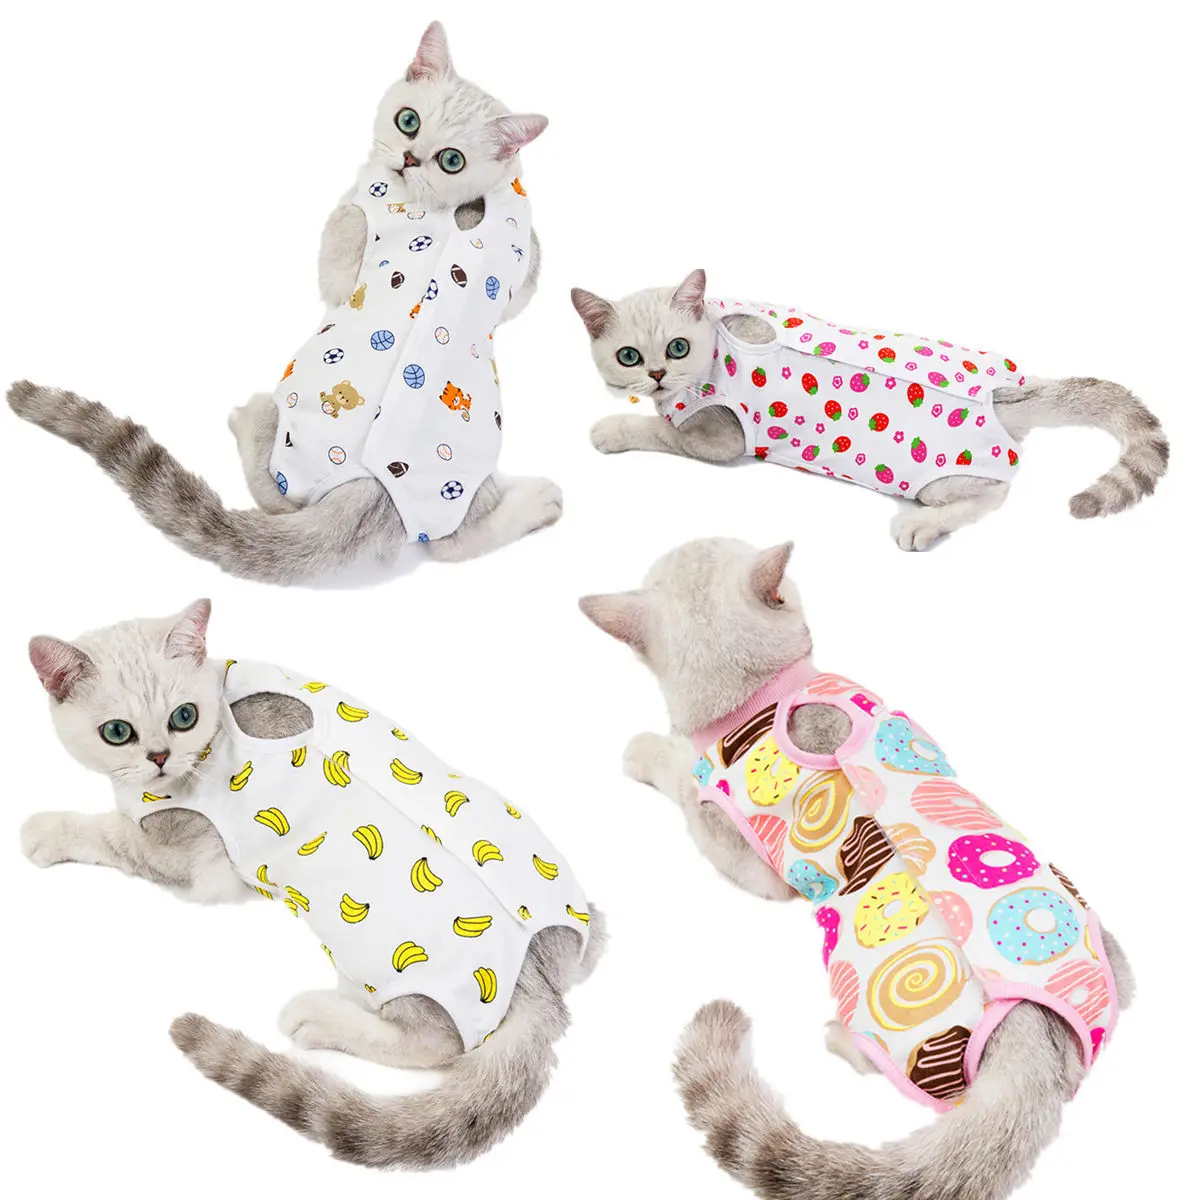 

Comfortable Strawberry Pattern Customs New Design Sterilization Recovery Suit Cat Surgery Pet Summer Clothes, Soccer banana doughnut strawberry